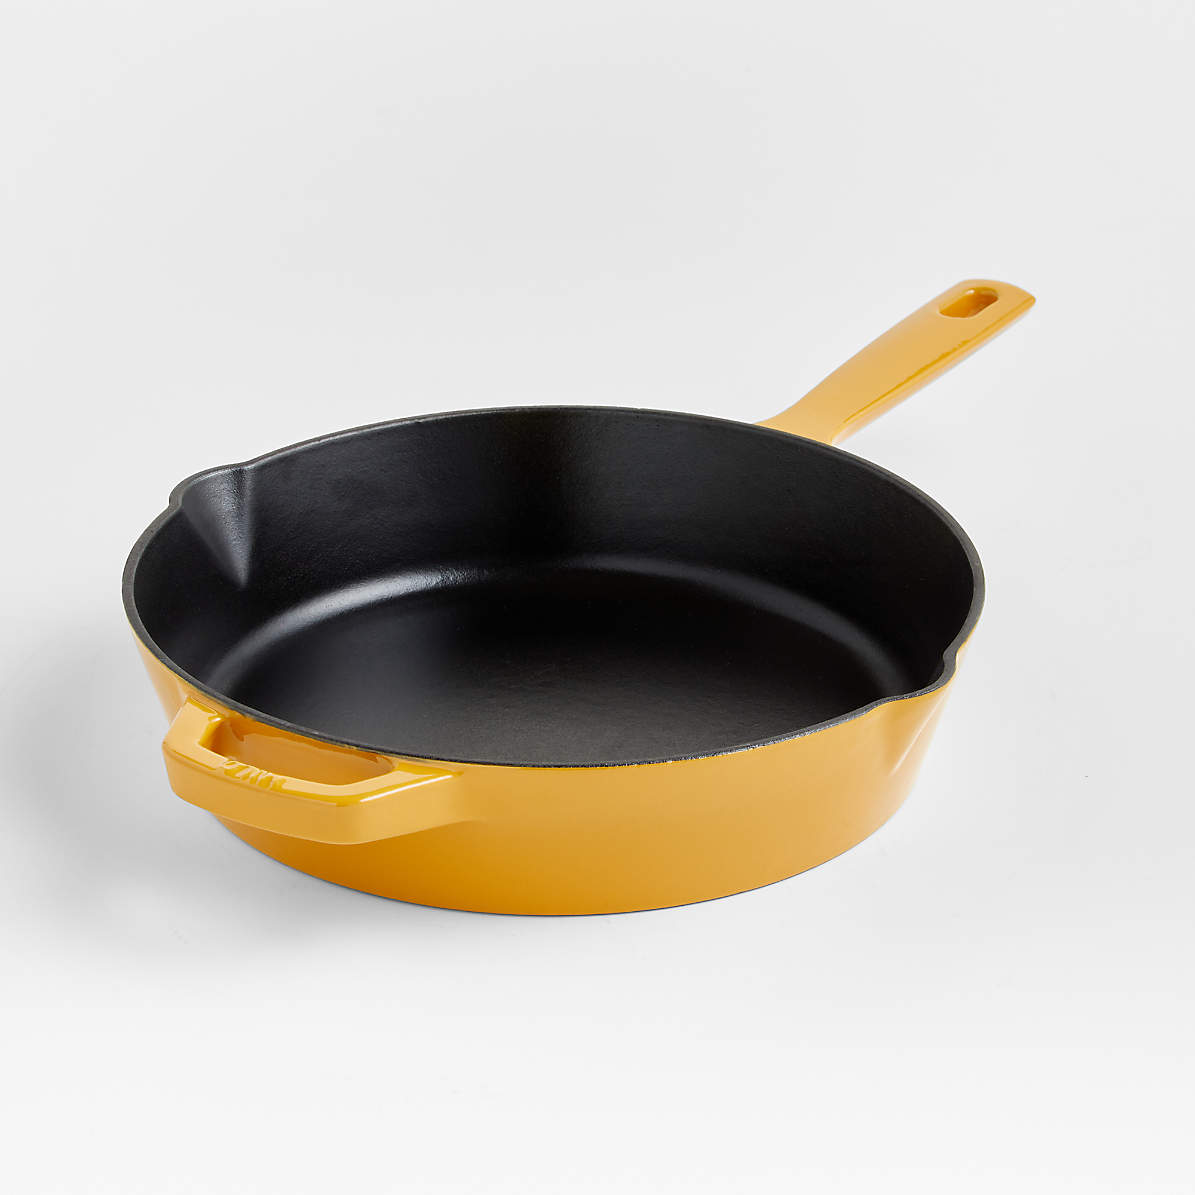 Milo by Kana Dutch Oven and Ultimate Skillet Set — Pebble